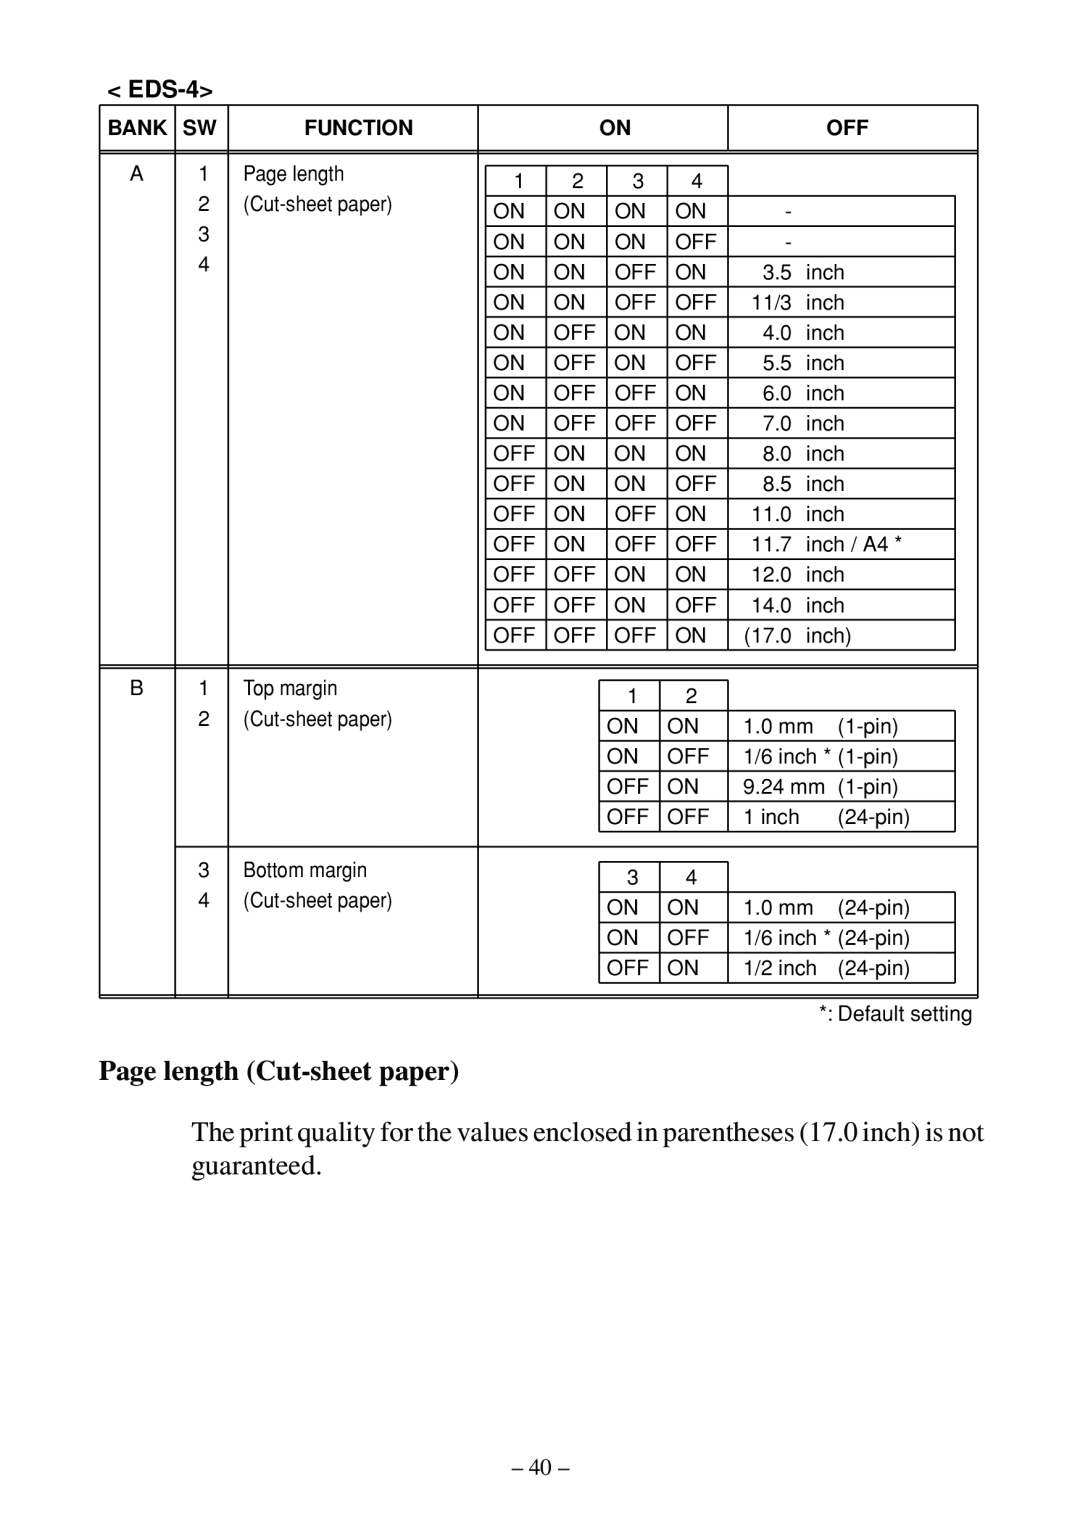 Star Micronics LC-500 user manual Page length Cut-sheet paper, EDS-4, Bank Sw, Function 